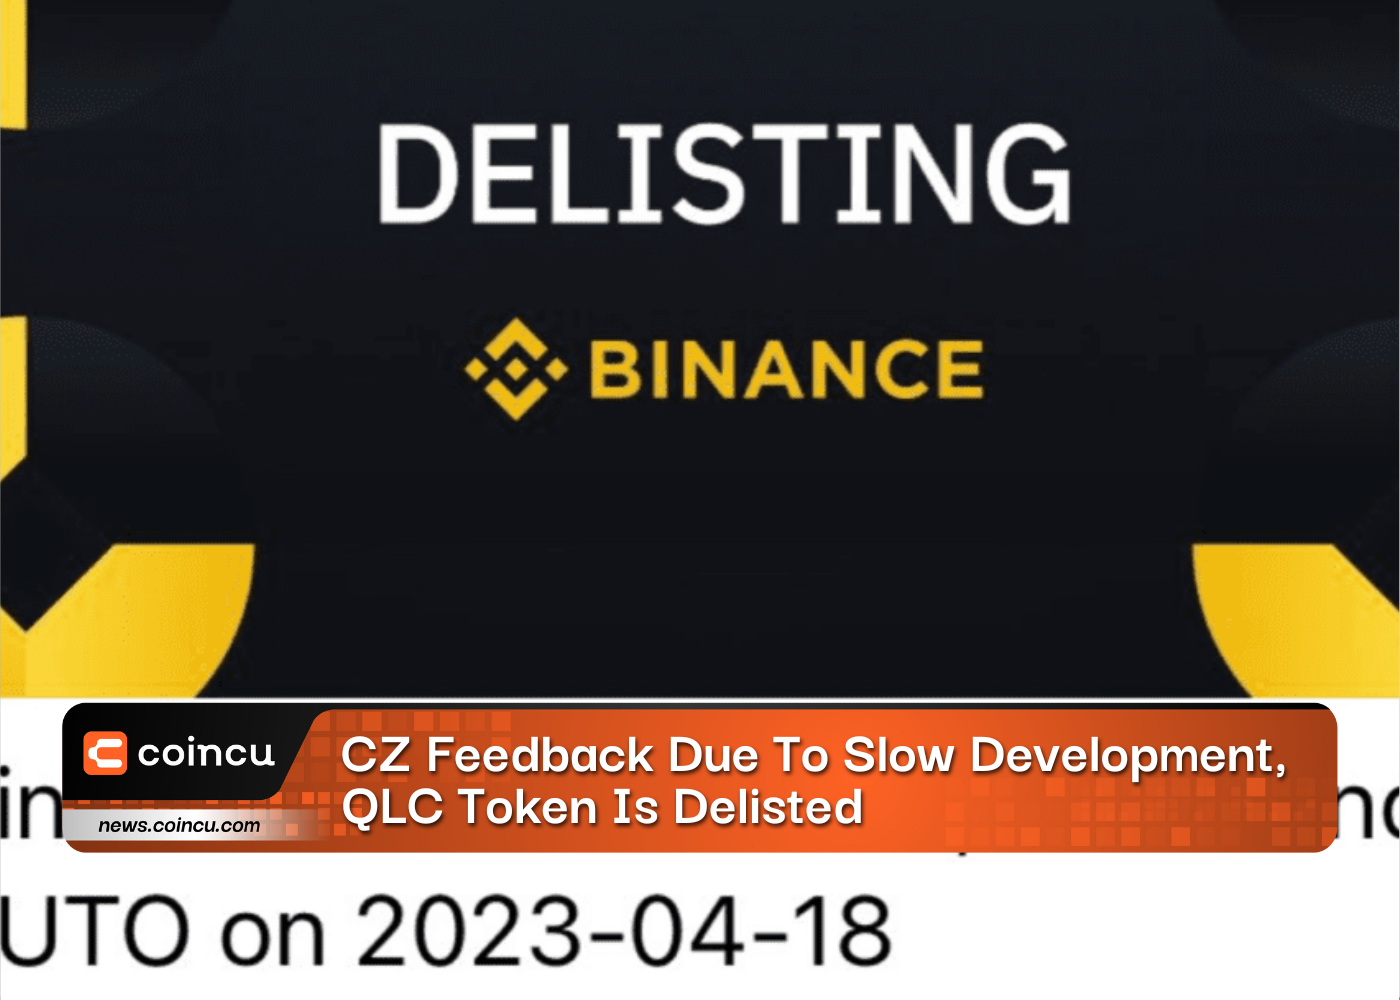 CZ Feedback Due To Slow Development, QLC Token Is Delisted